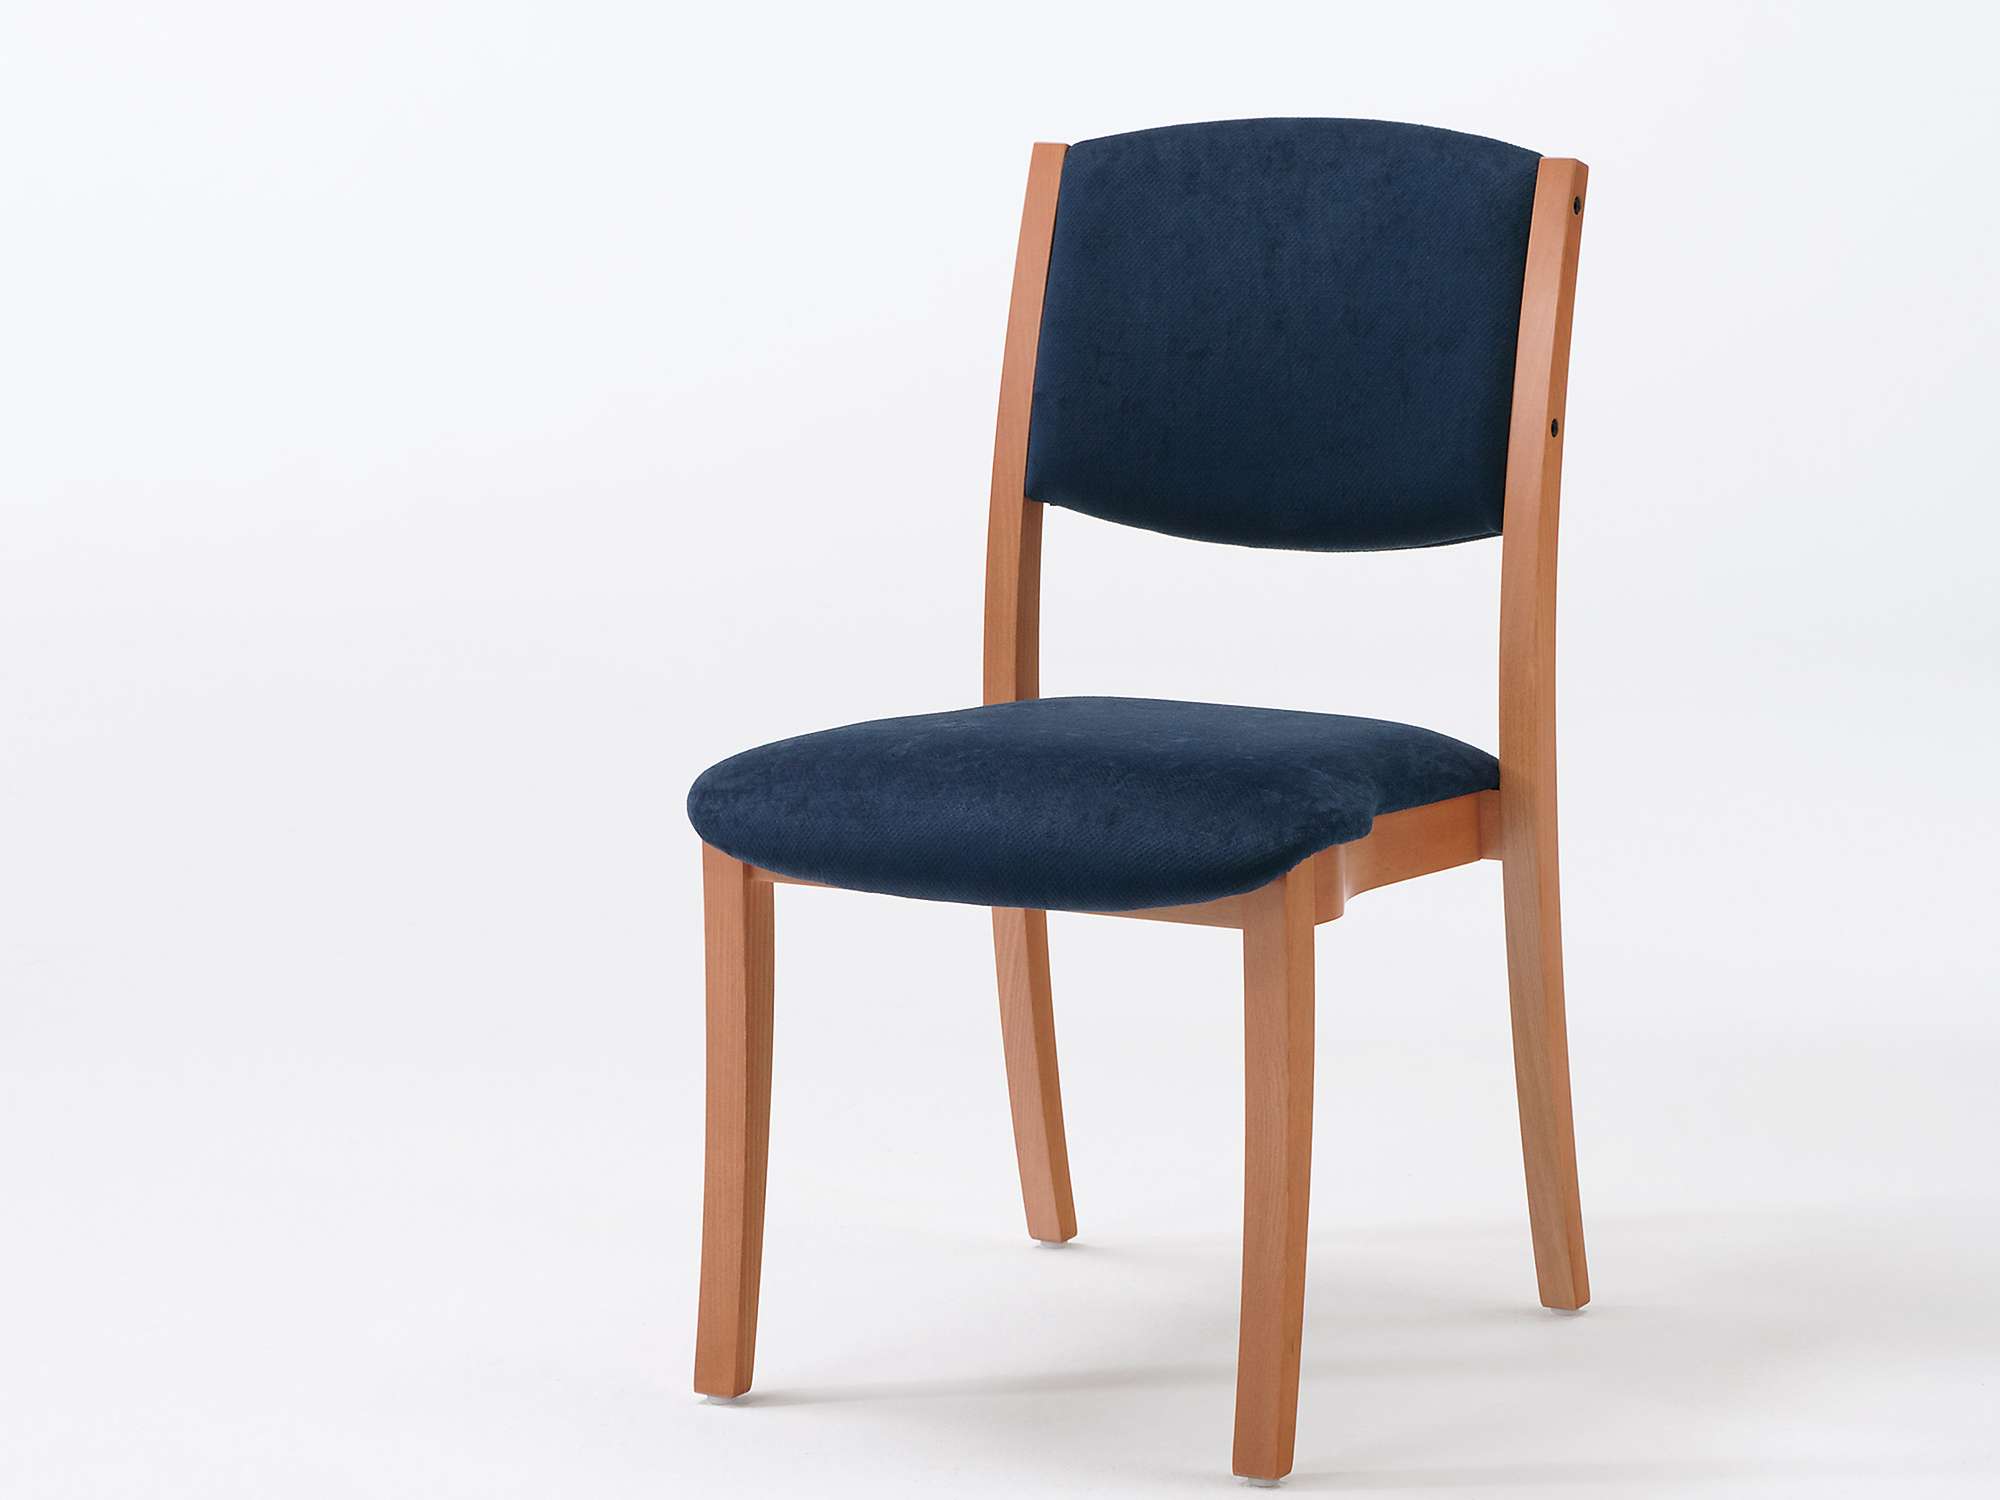 The Sedego model as a stacking chair